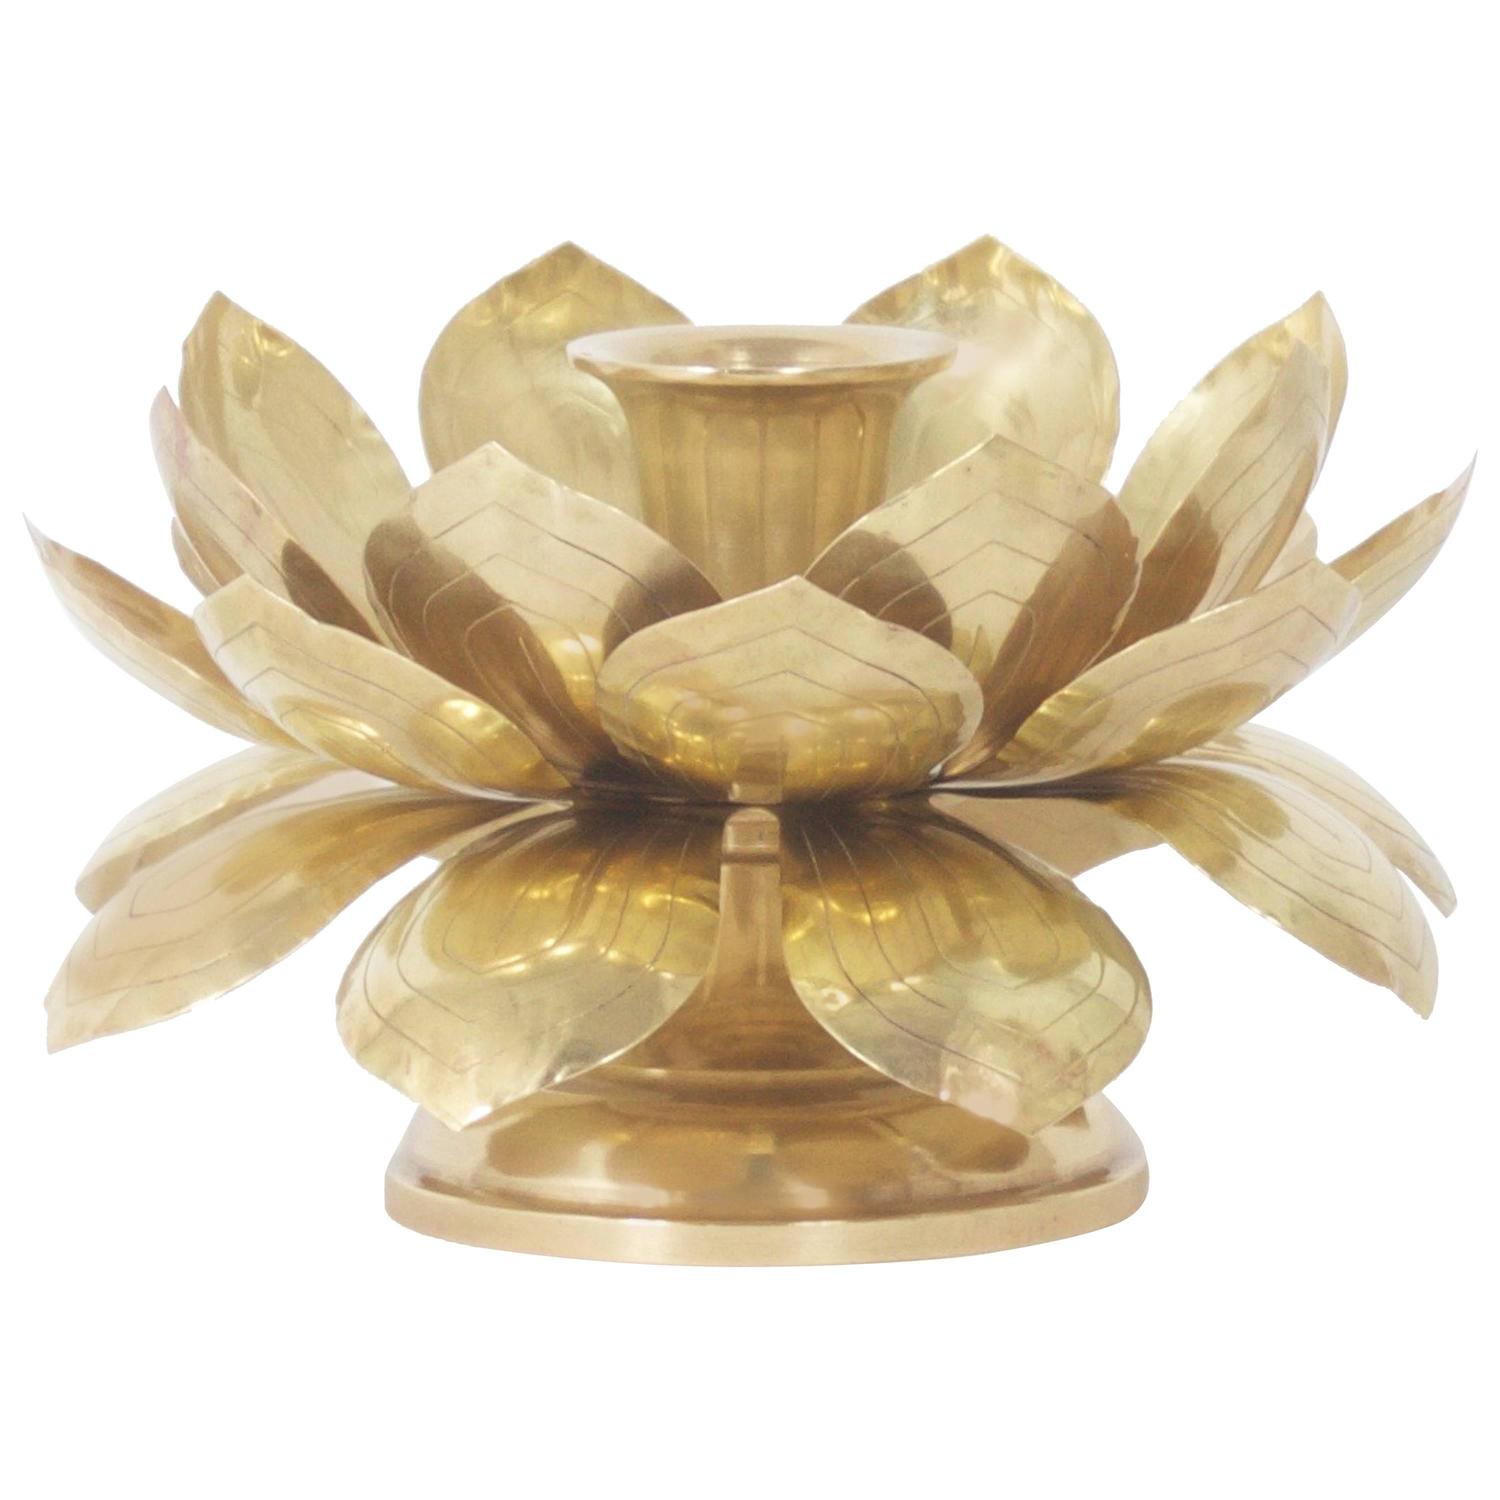 Exotic Brass Lotus Flower Candle Holder at 1stdibs